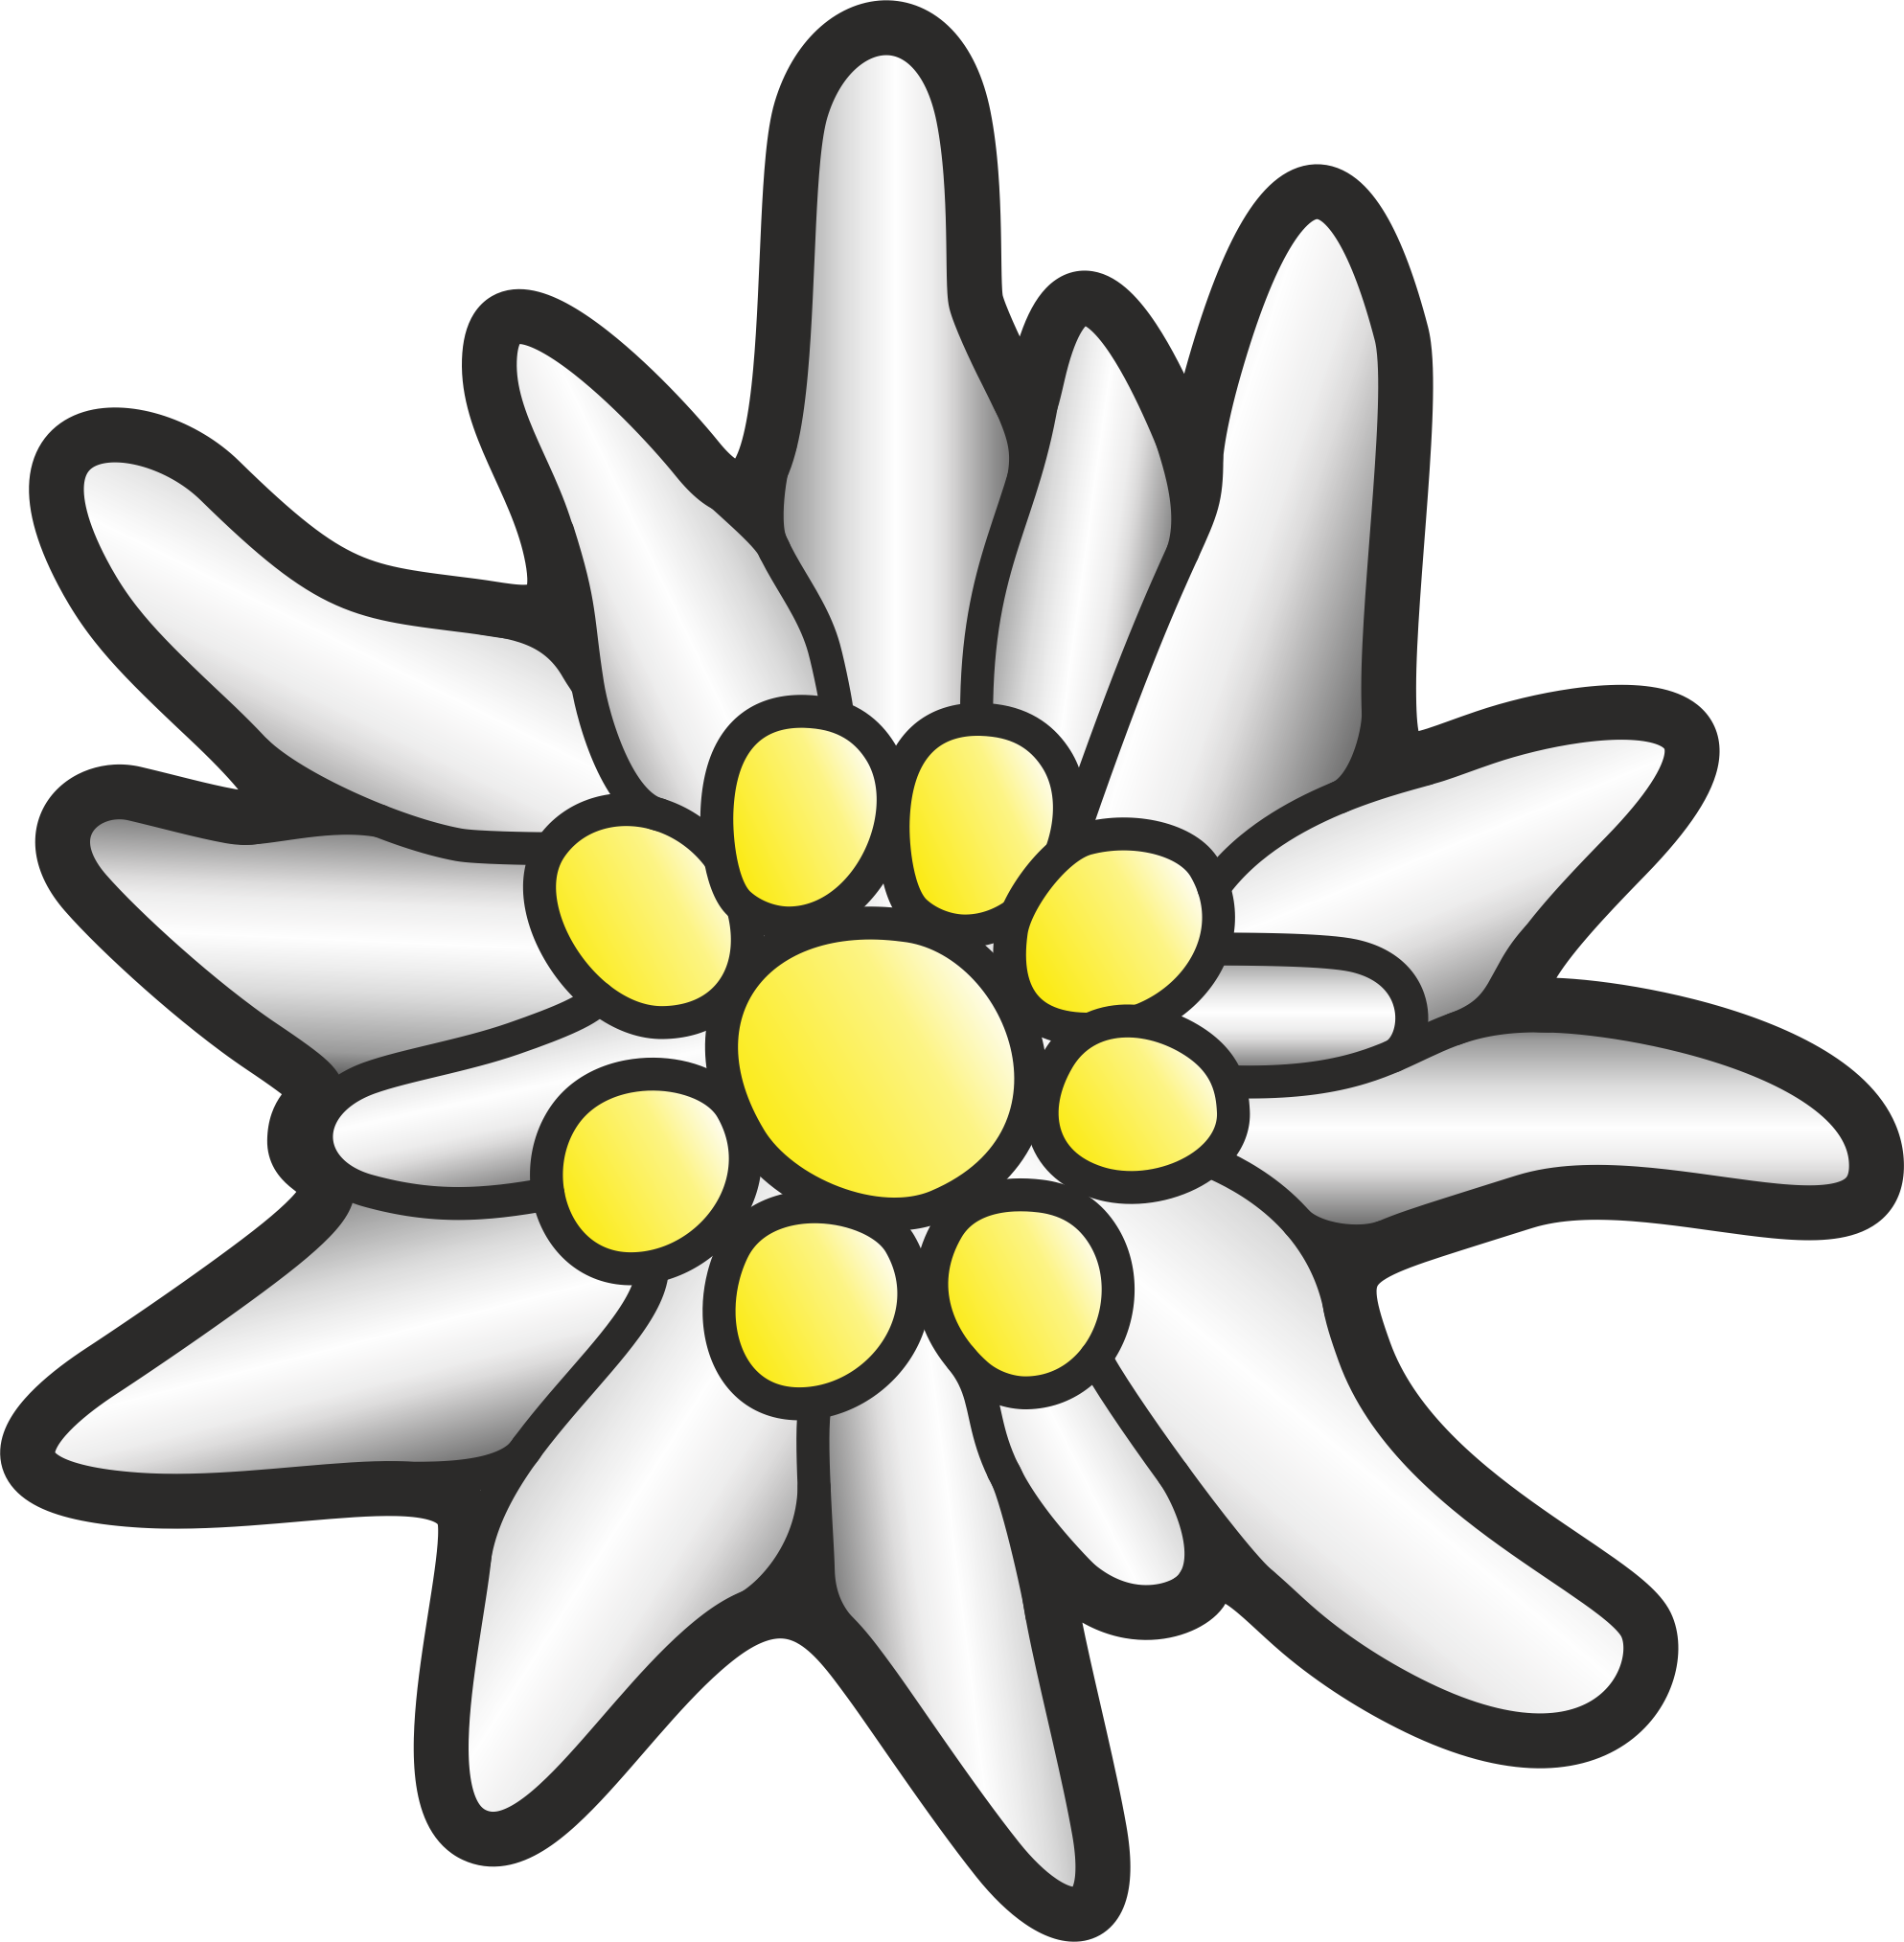 Edelweiss Free PNG Image